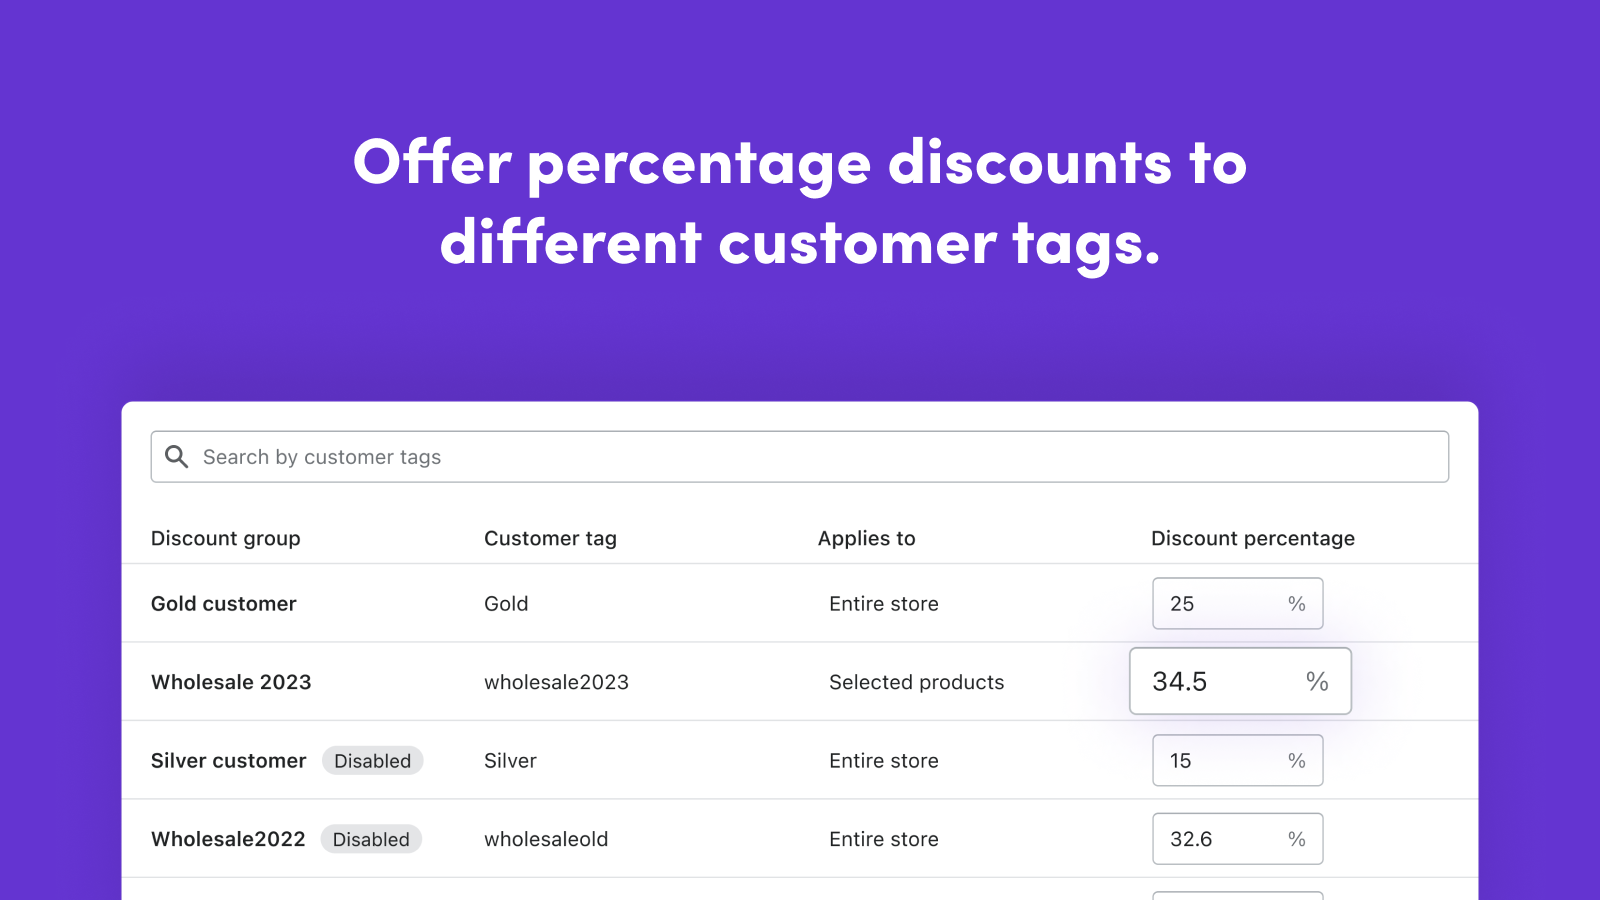 Offer percentage discounts to different customer tags